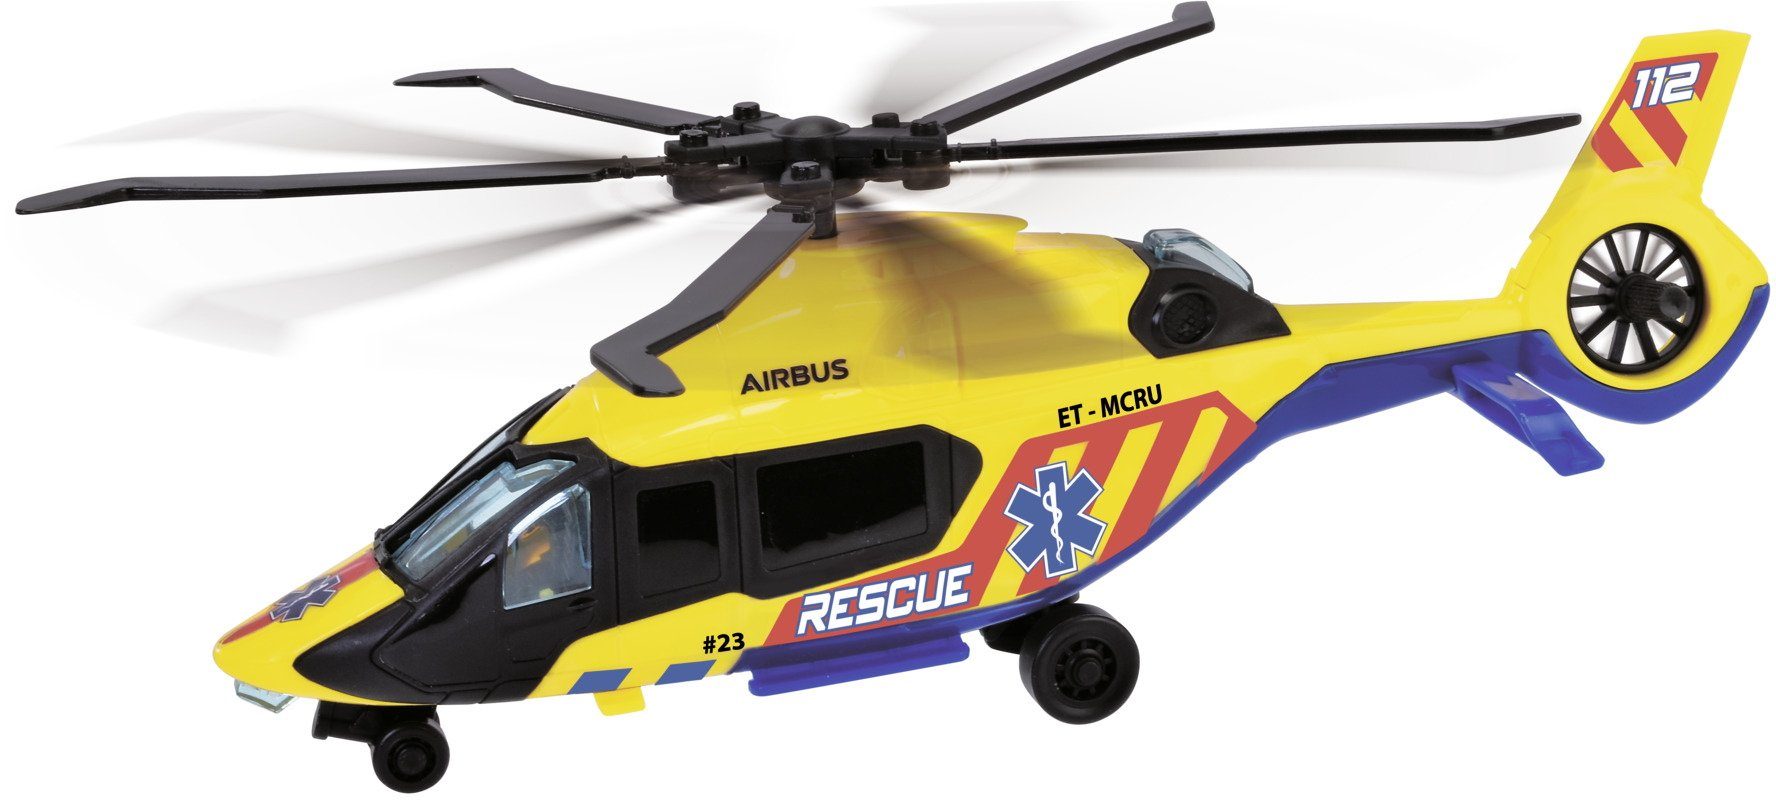 203714022 Toys Helicopter / Real Go Spielzeug-Hubschrauber Airbus SOS Rescue Helikopter H160 Dickie